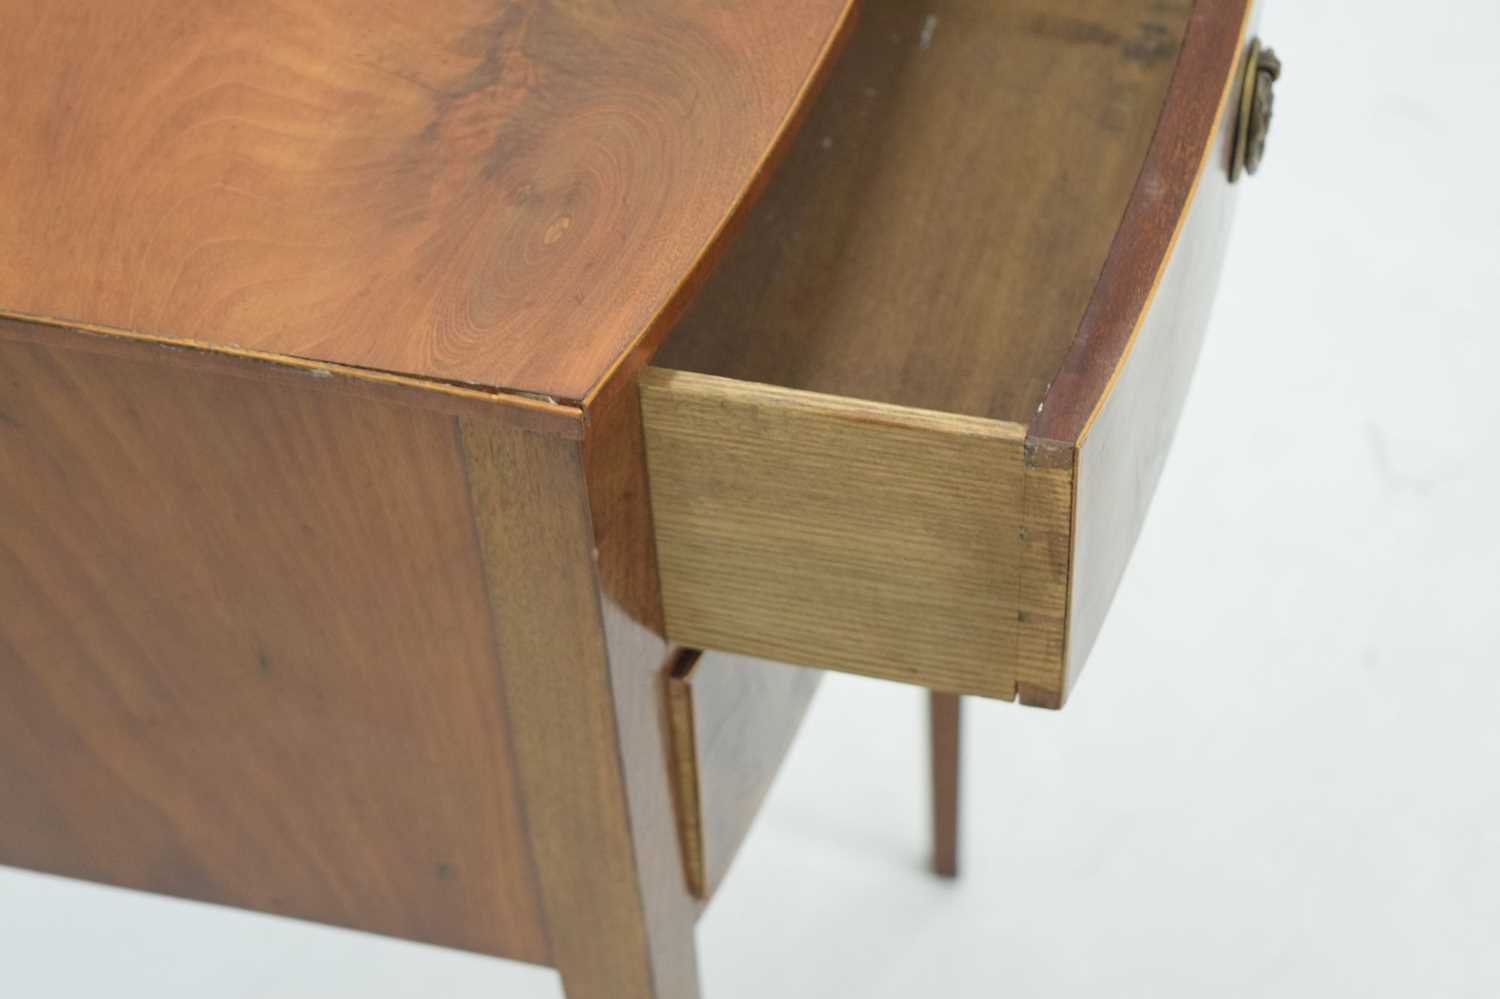 20th century reproduction bow front two drawer bedside table - Image 5 of 8